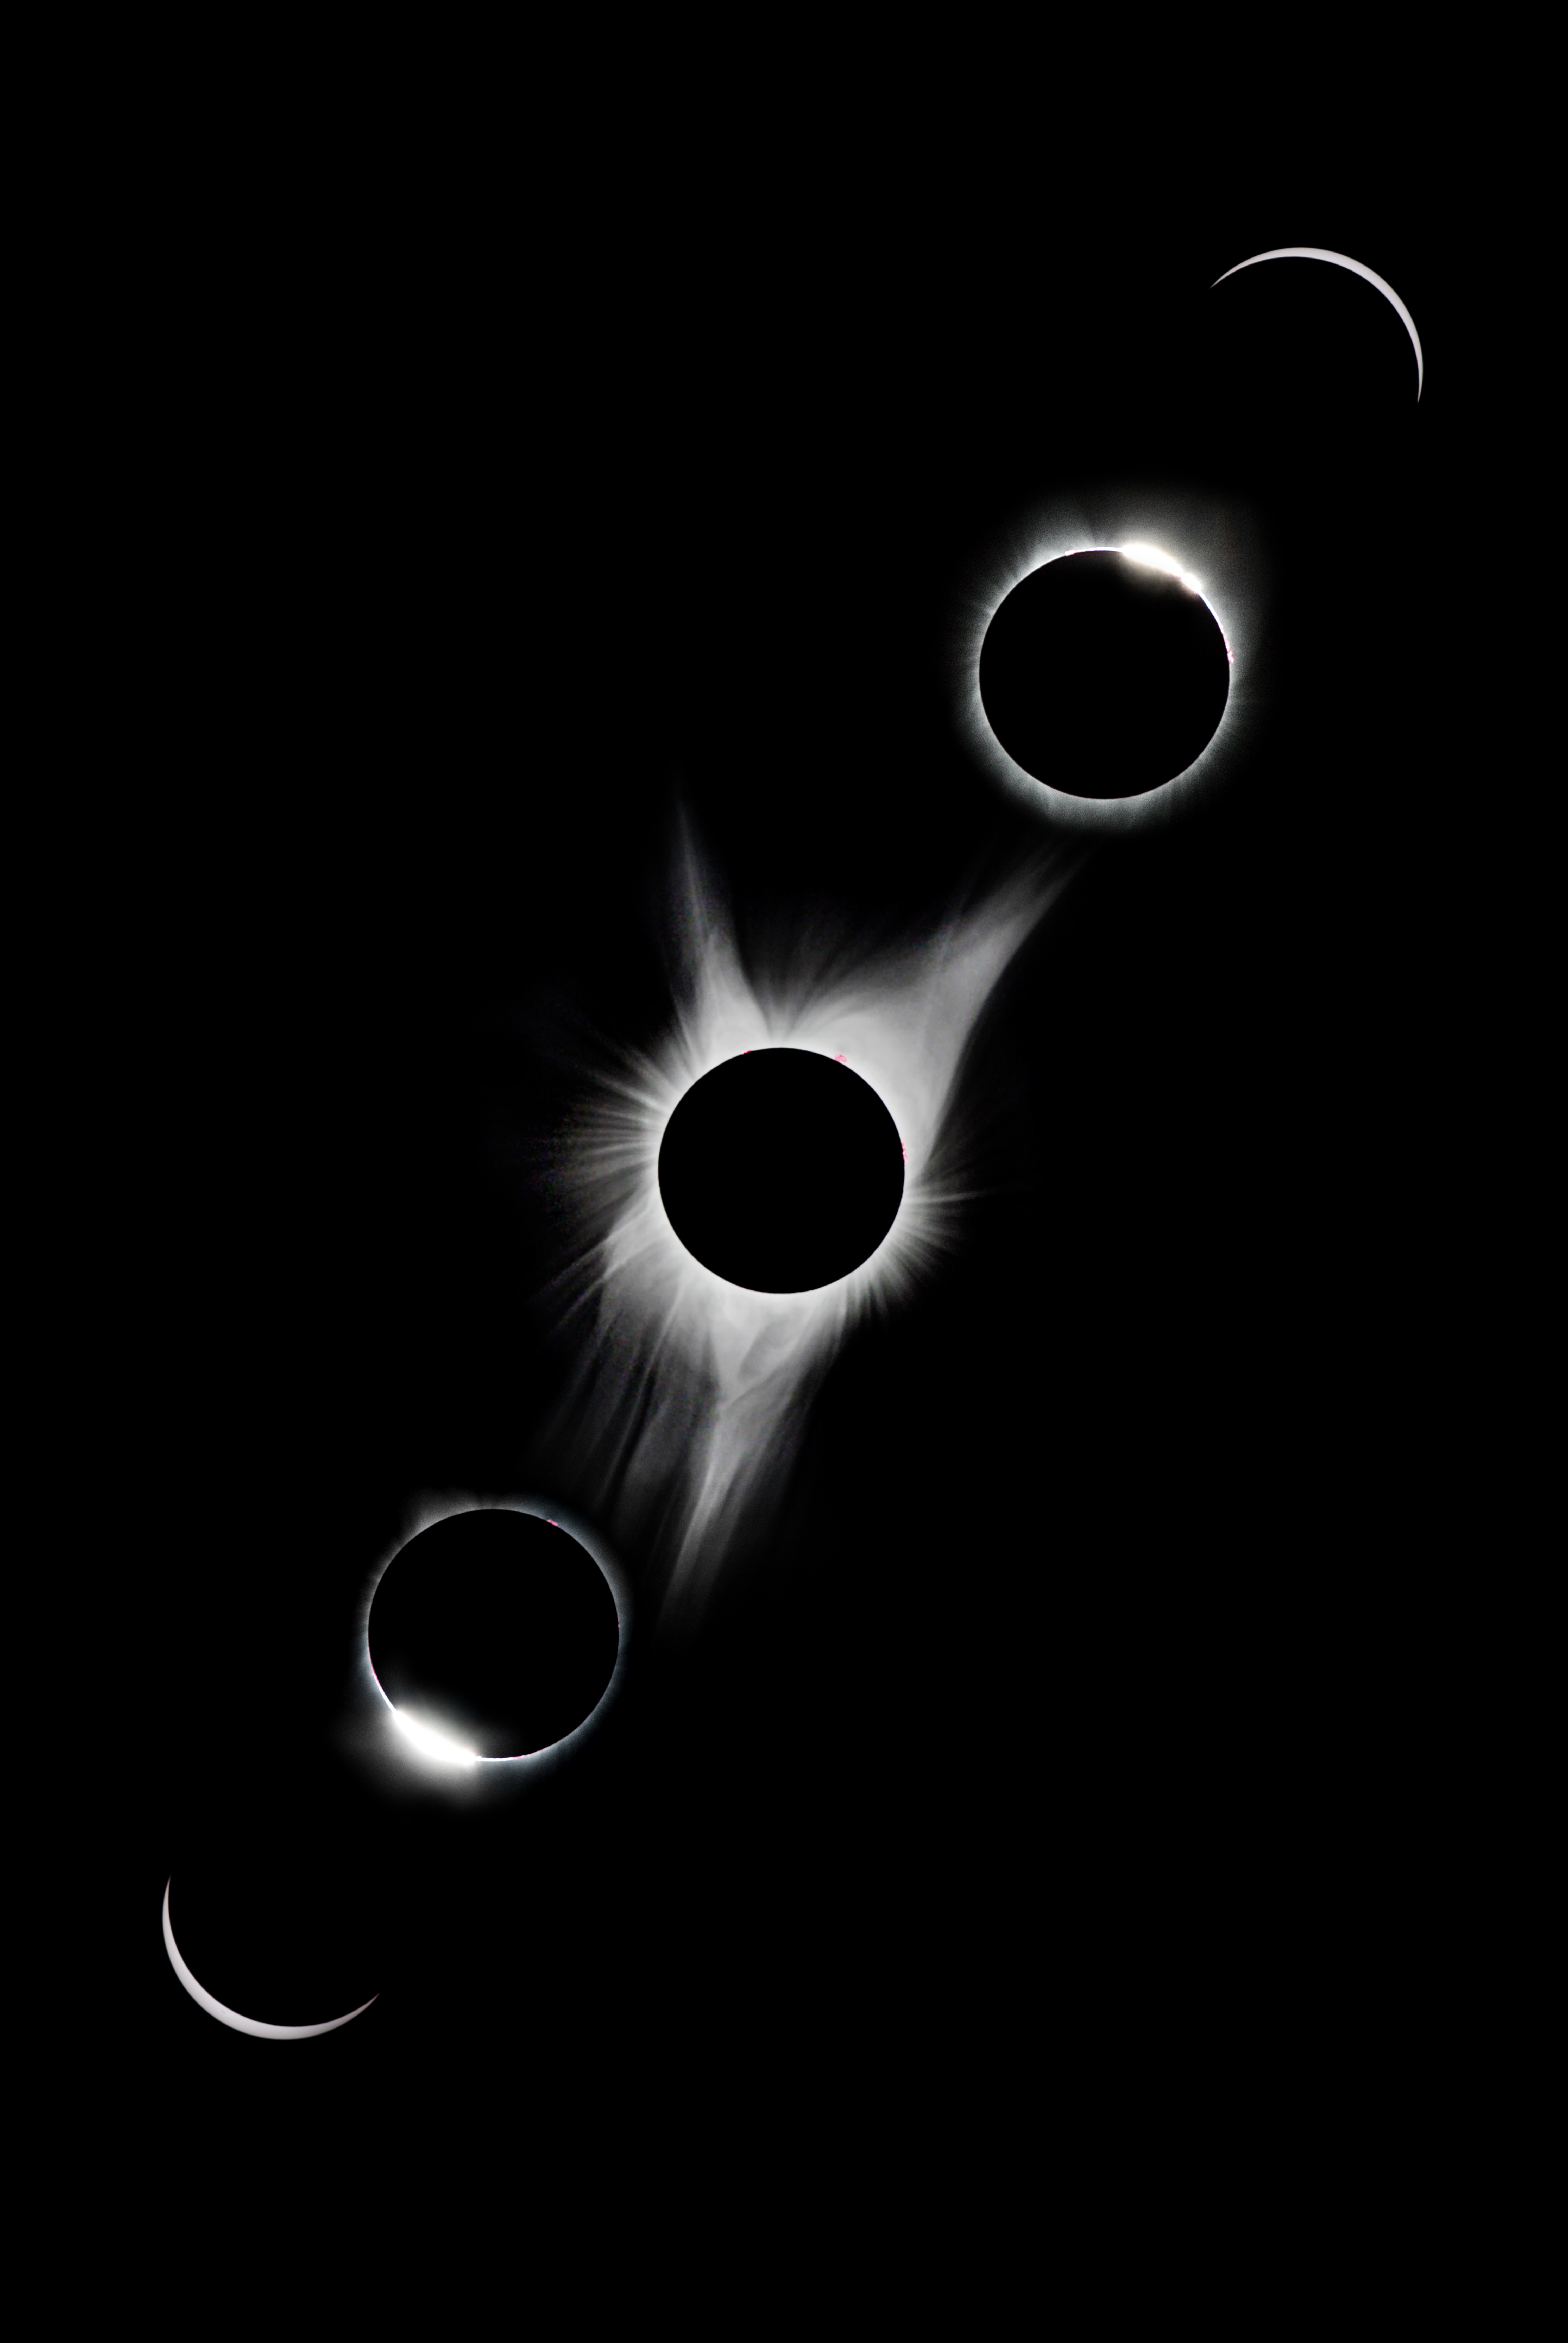 sequential images of eclipse phases